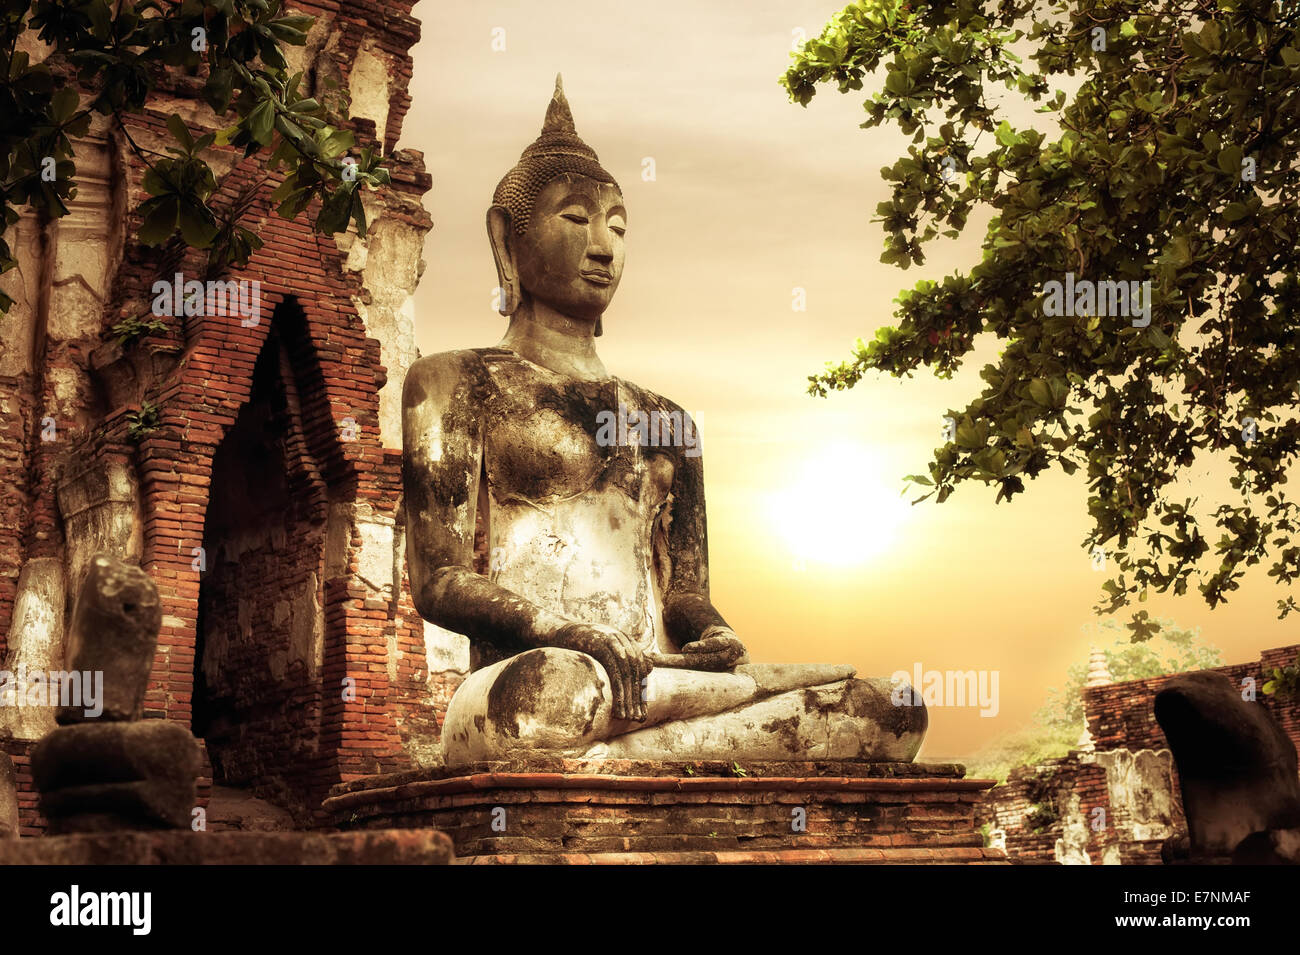 Asian religious architecture. Ancient sandstone sculpture of Buddha at Wat Mahathat ruins under sunset sky. Ayutthaya, Thailand Stock Photo